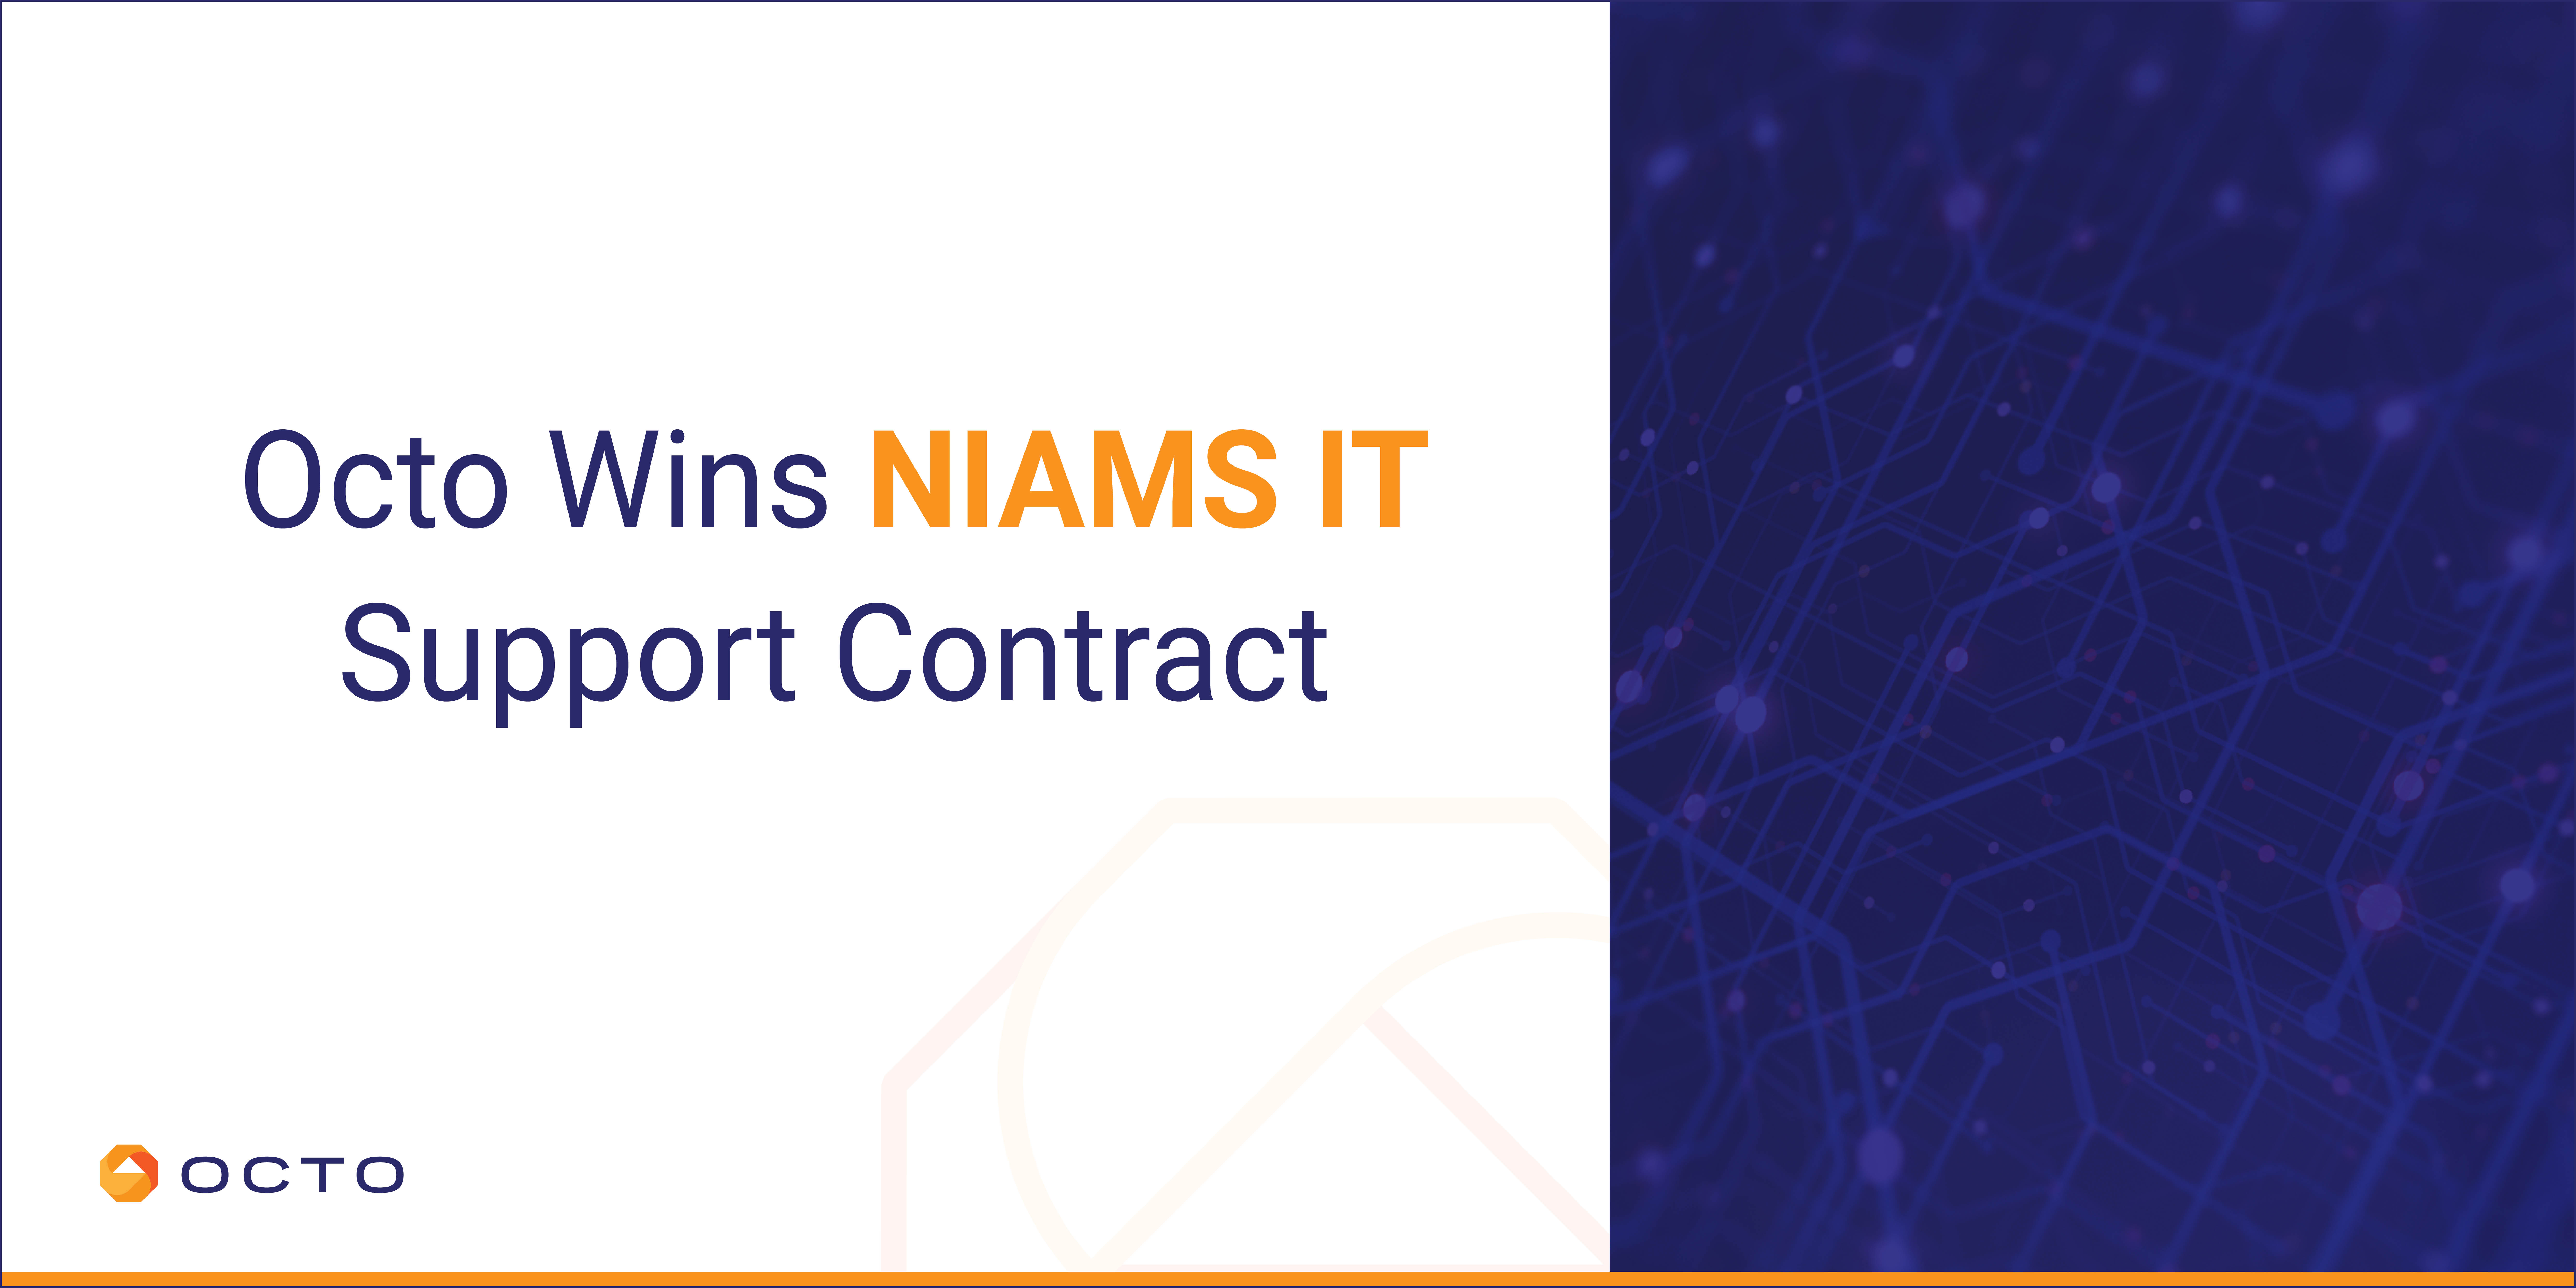 Octo Wins NIAMS IT Support Contract